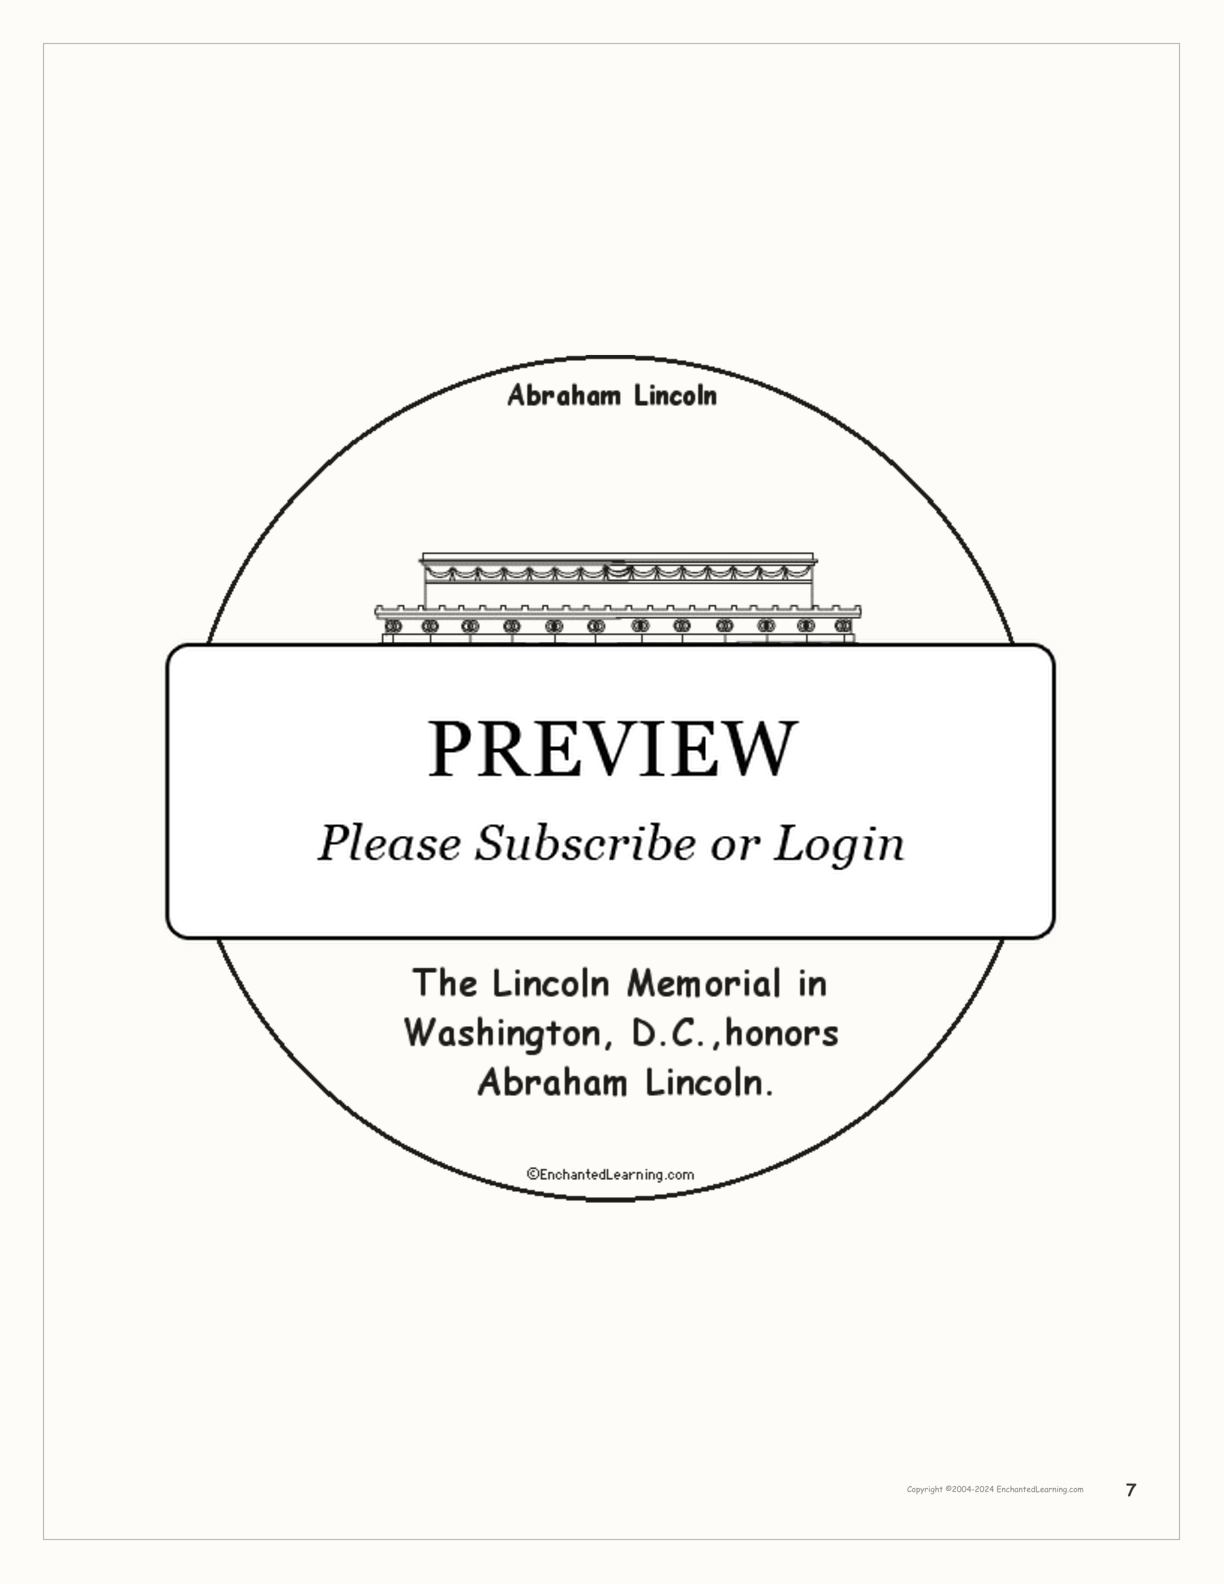 Abraham Lincoln Book interactive printout page 7